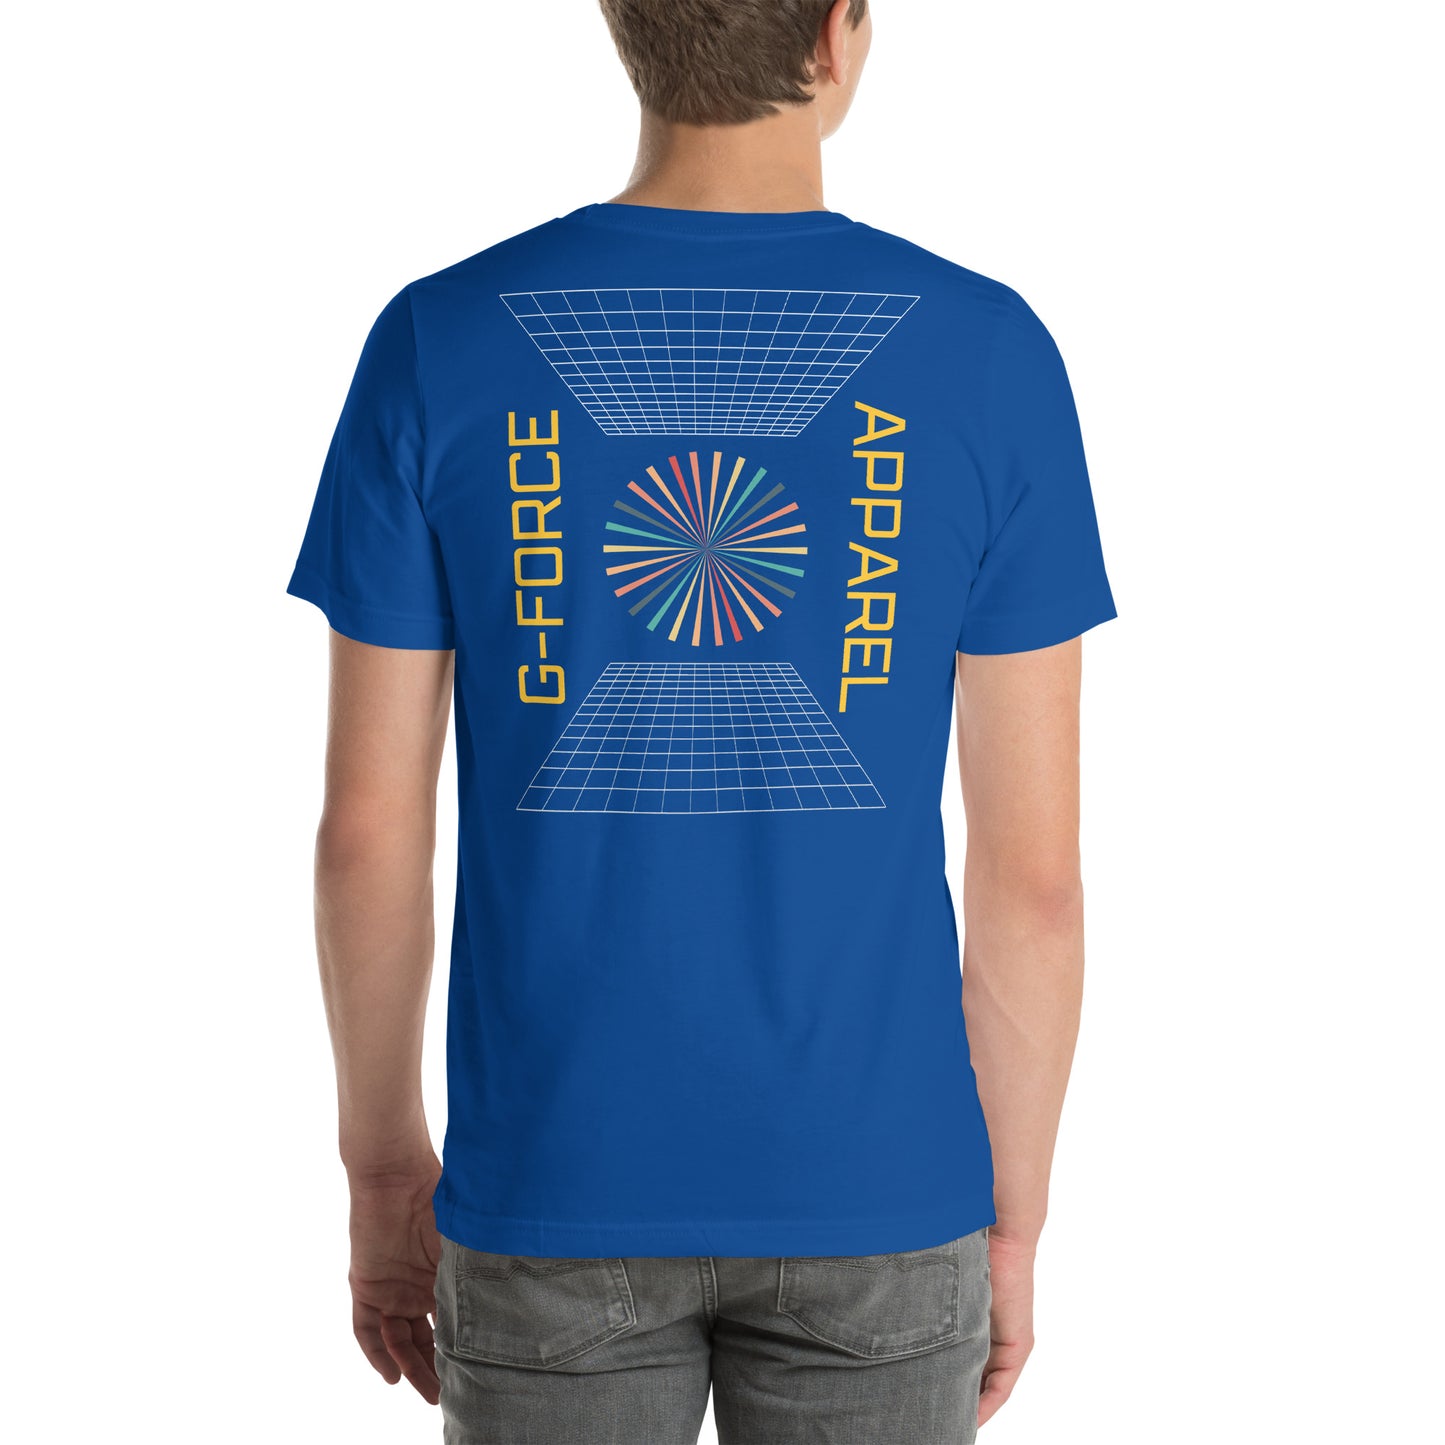 G-FORCE APPAREL Dimensions Tee